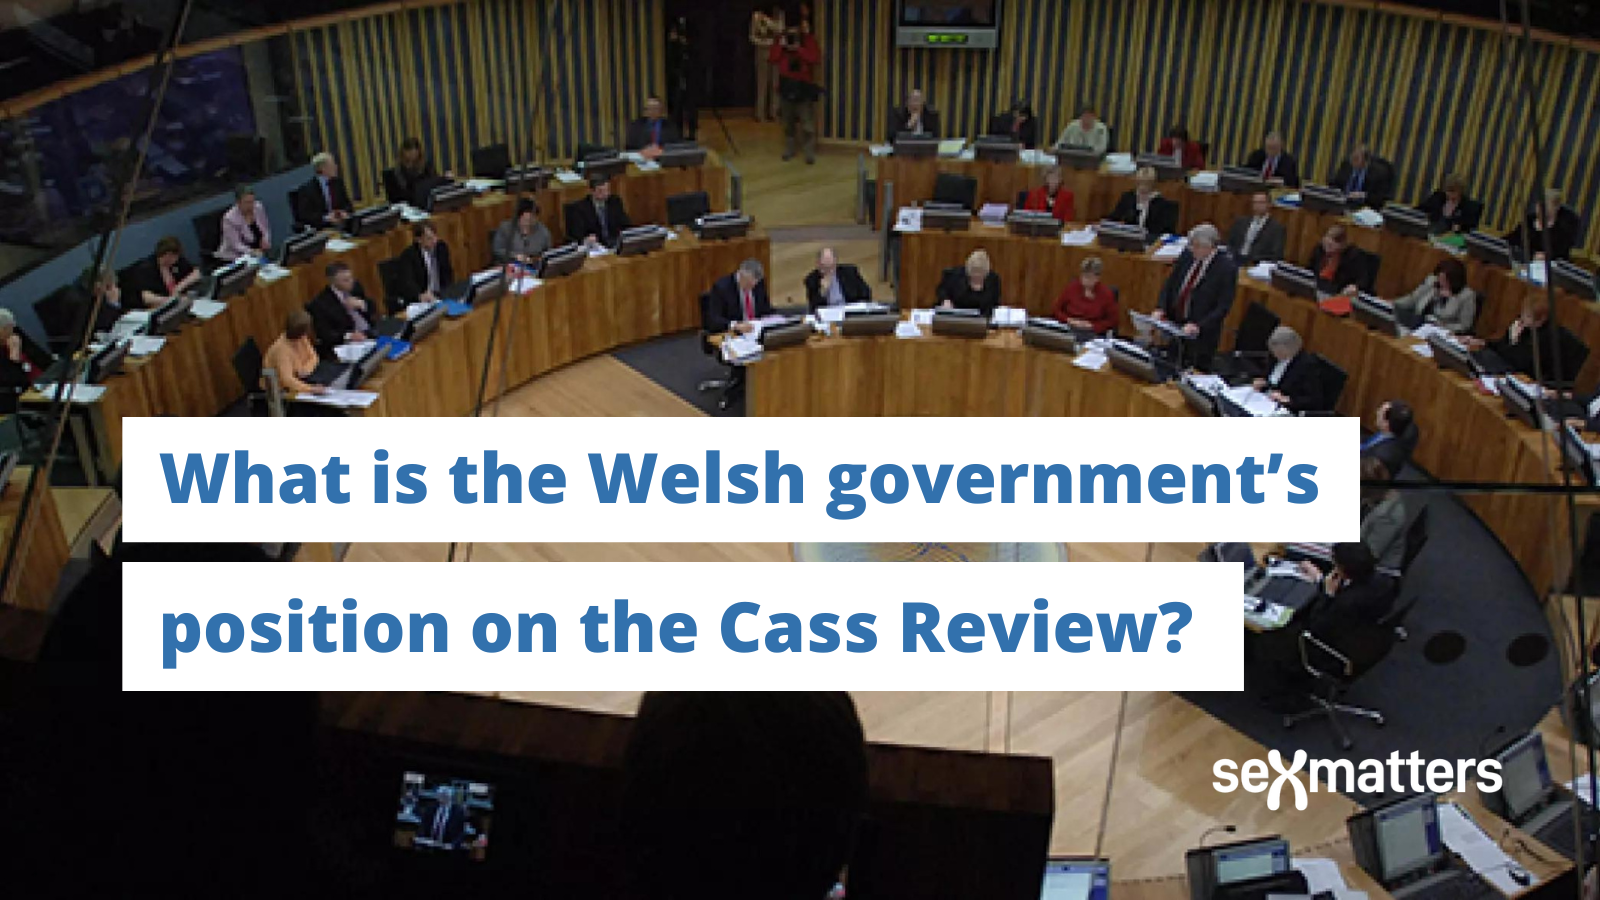 What is the Welsh government’s position on the Cass Review?